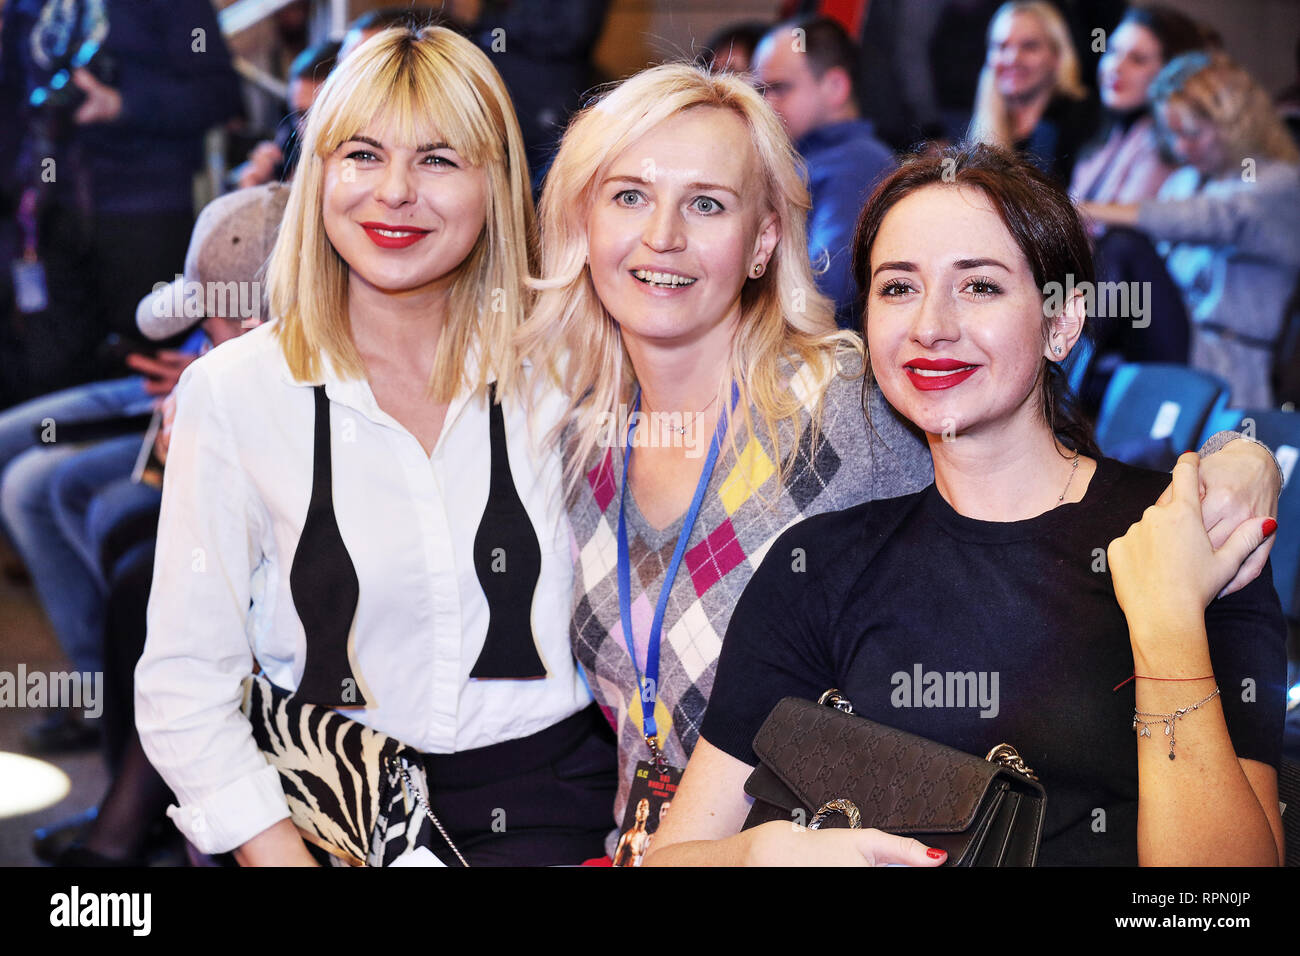 Ukraine's only Female Boxing World Champion, good looking blond Alina Shaternikova (central) poses with her two girl friends at boxing event in Kiev. Stock Photo